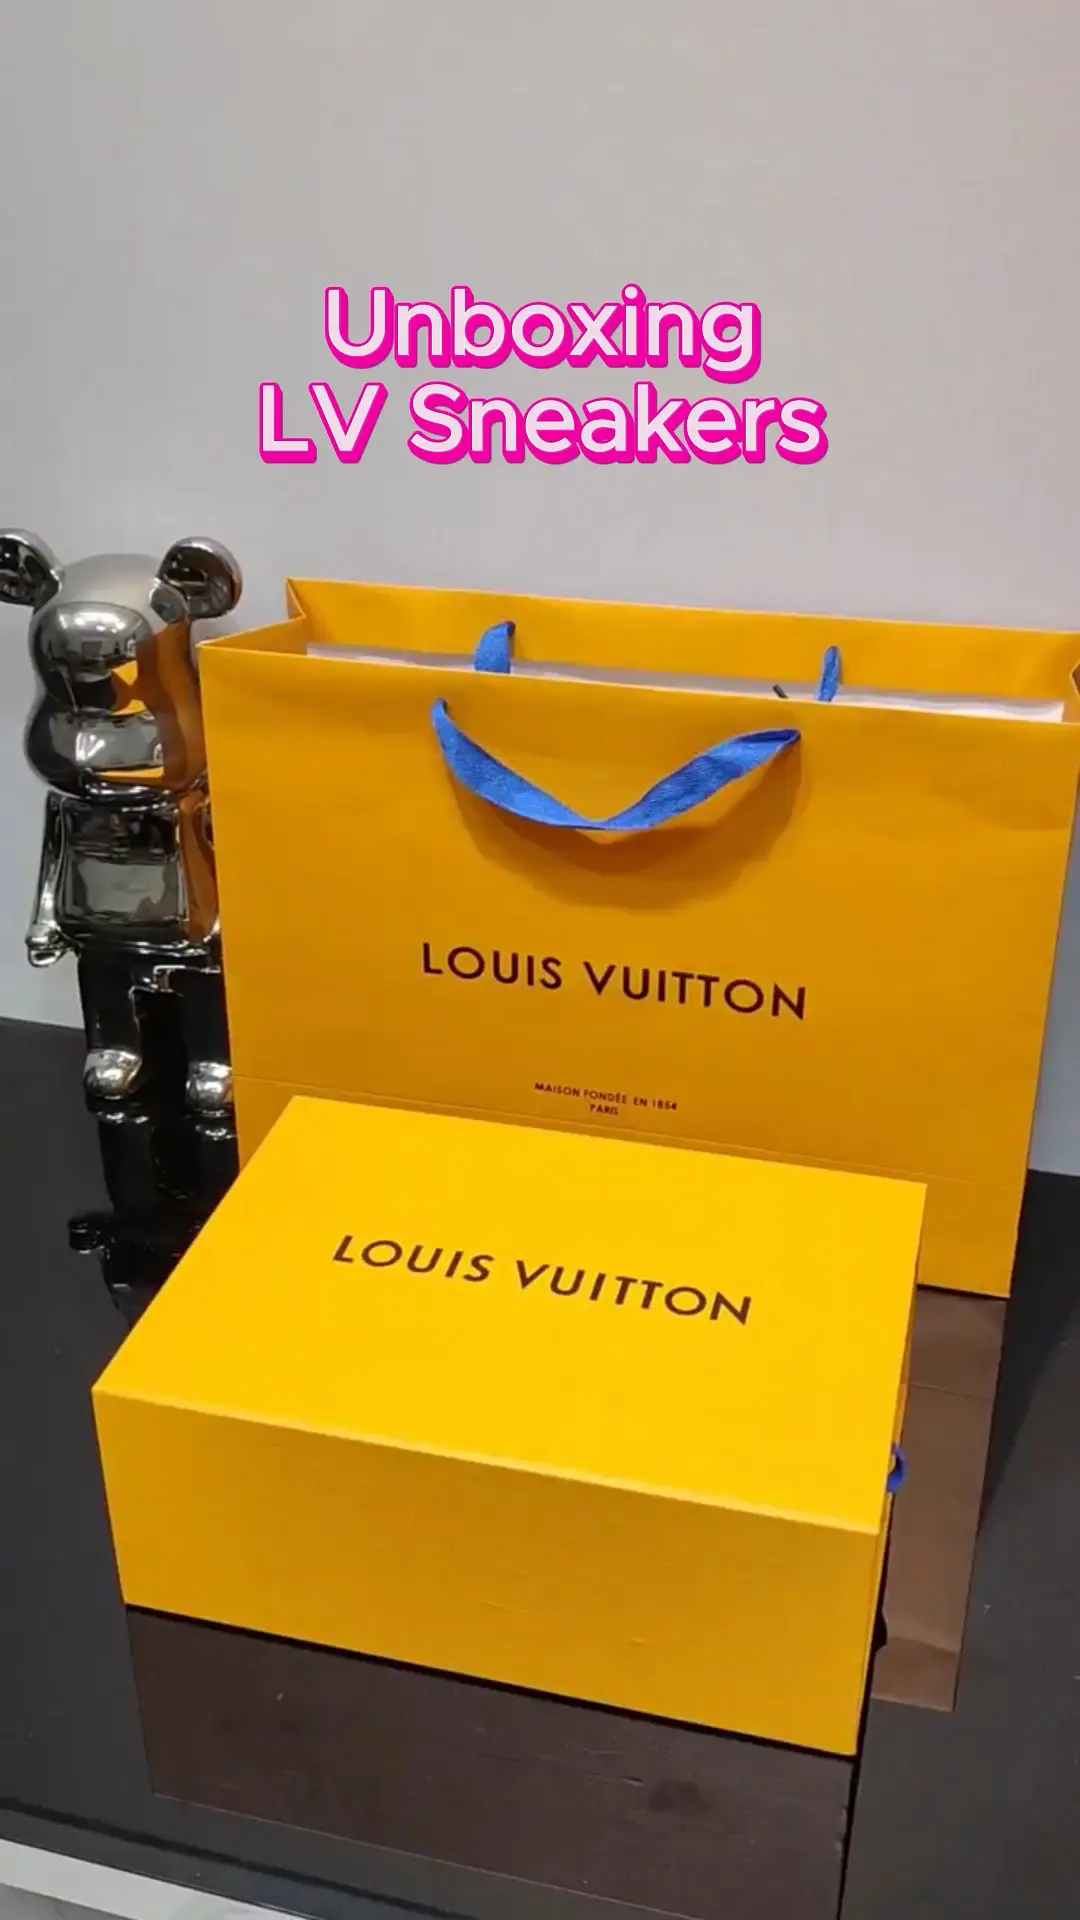 Louis Vuitton LV RUN AWAY SNEAKER UNBOX AND REVIEW , DO THEY LOOK